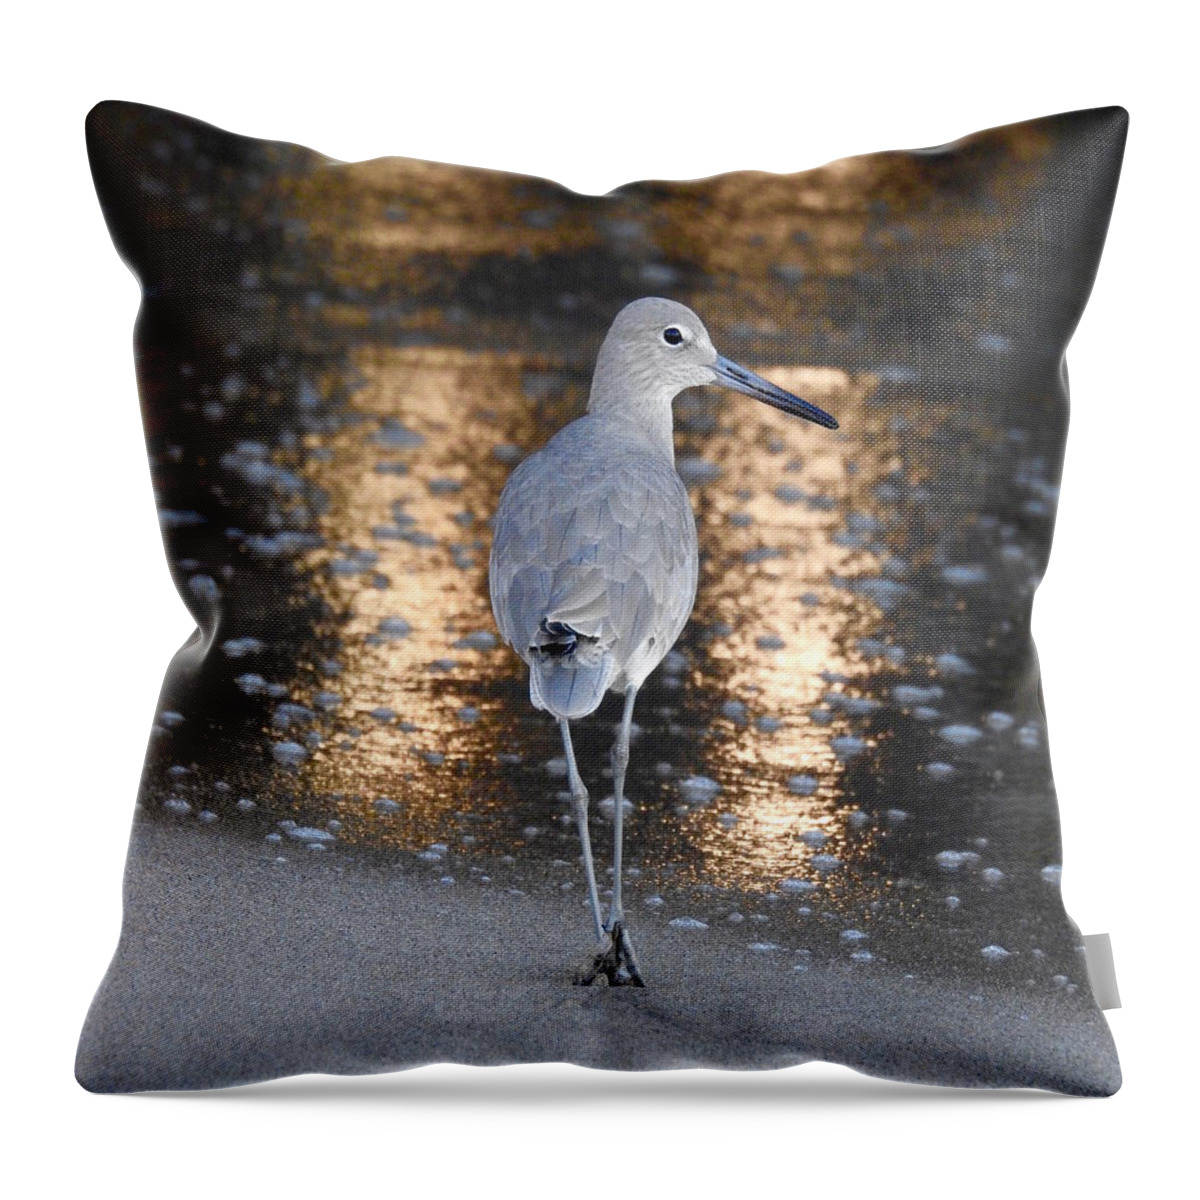 Sandpiper Throw Pillow featuring the photograph Sunrise Sandpiper by Beth Myer Photography